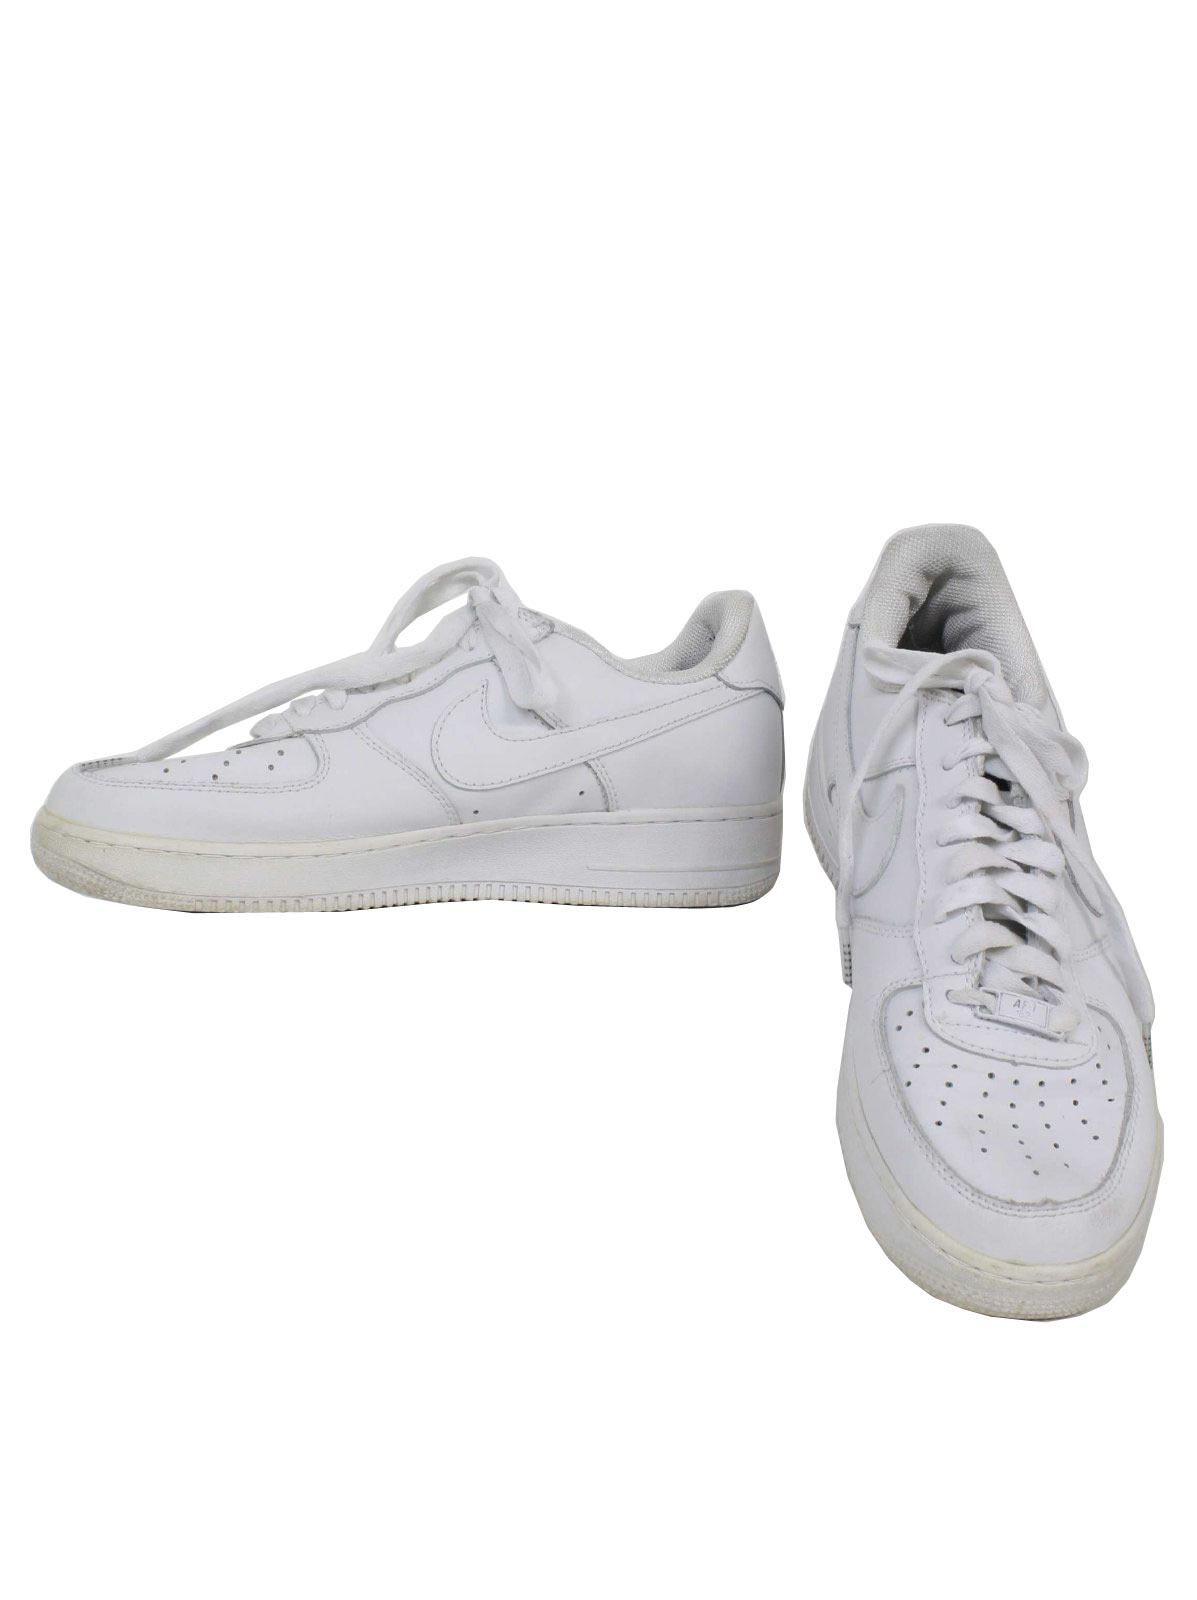 old white air force ones